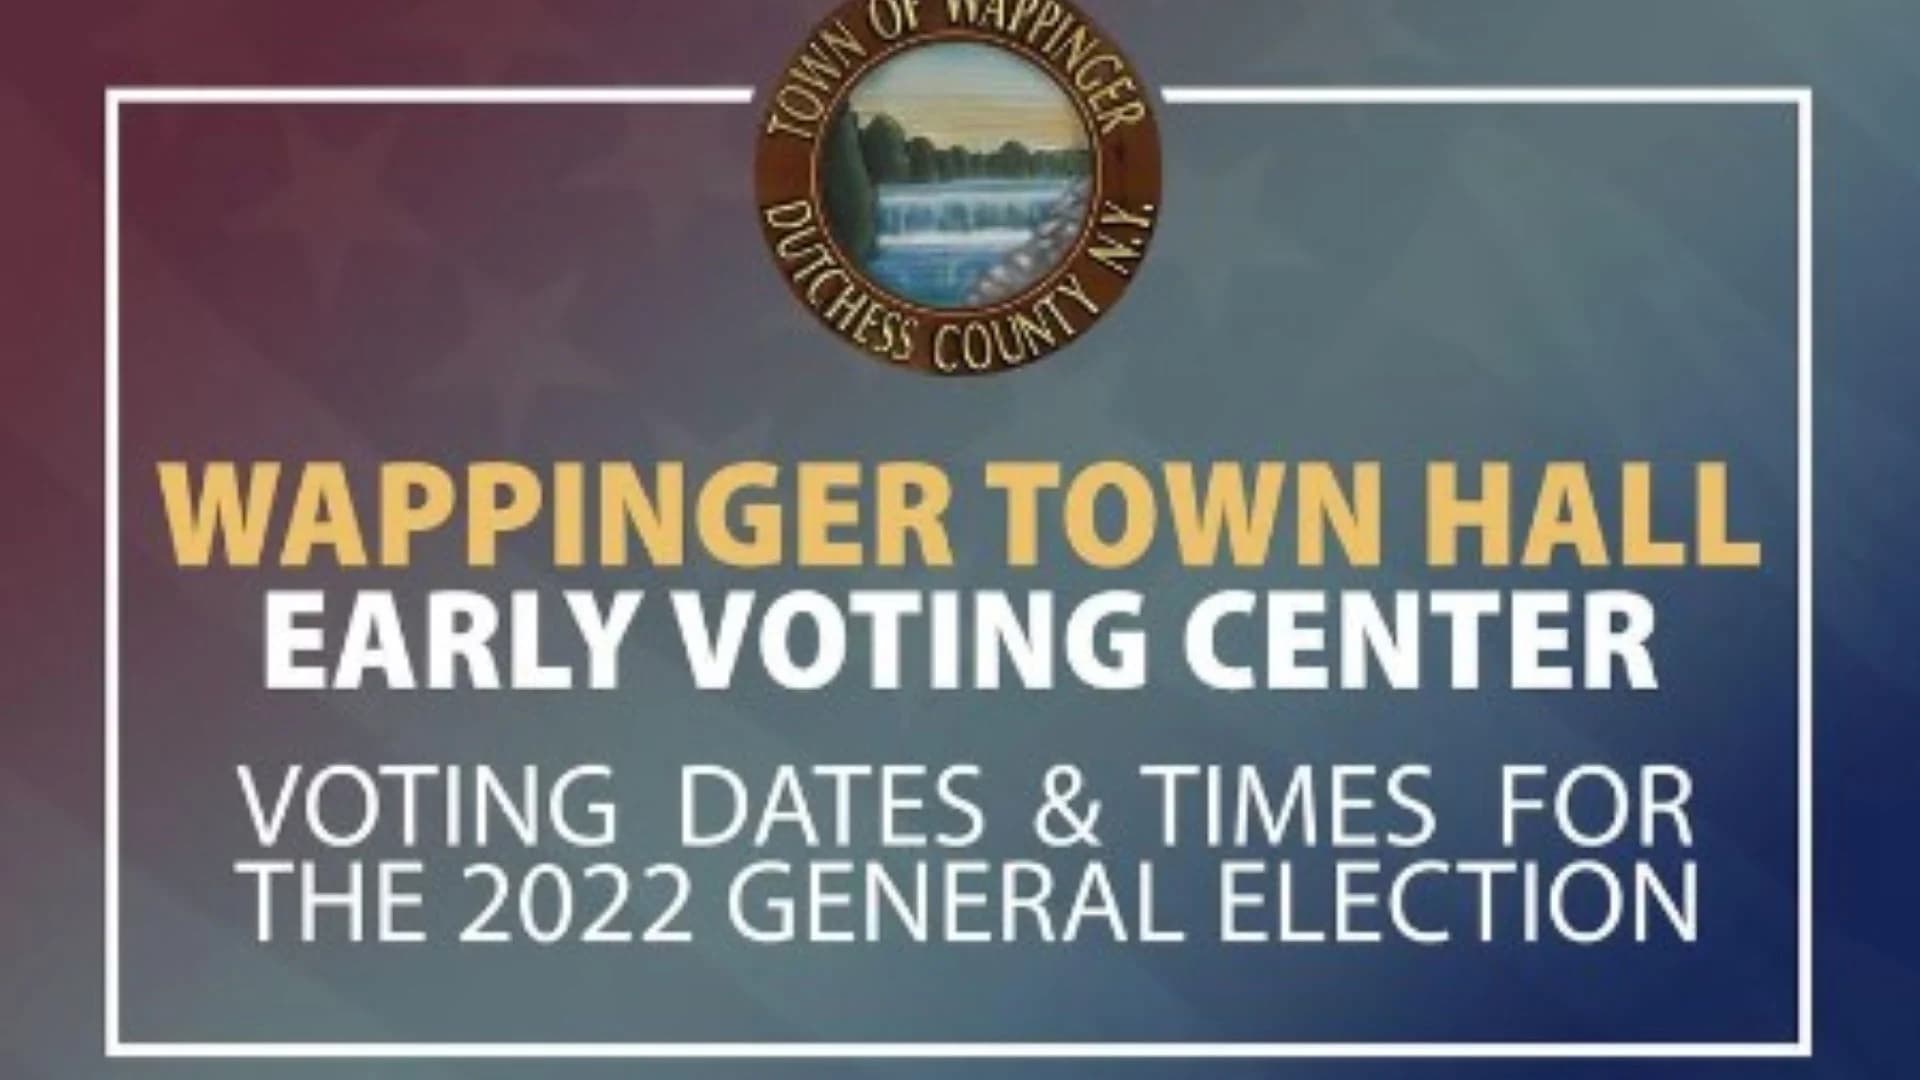 Wappinger Town Hall set for early voting starting Oct. 29